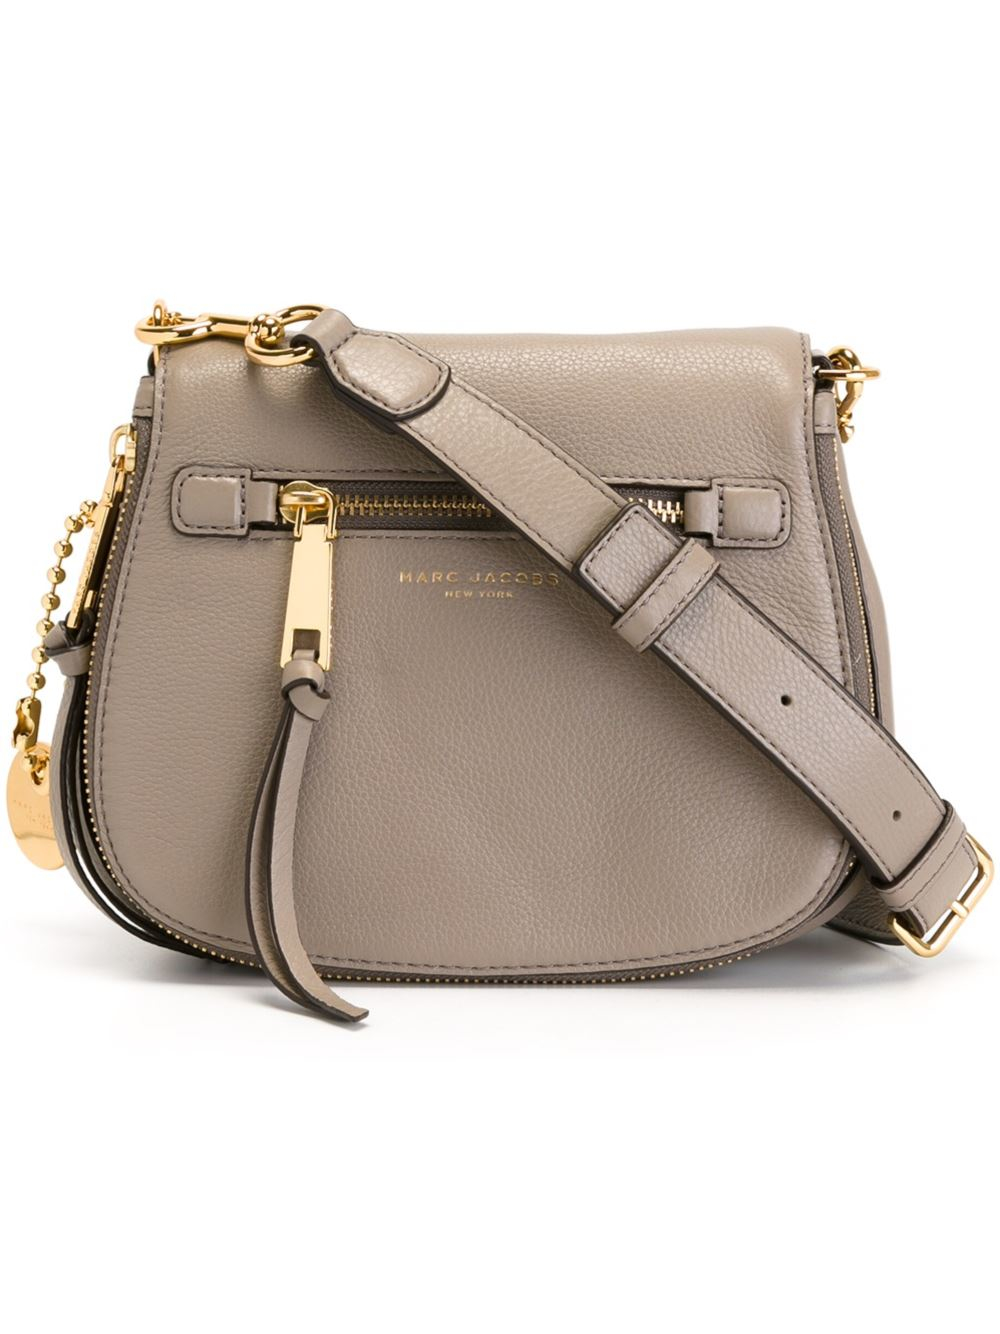 Marc jacobs Recruit Small Crossbody Bag in Brown - Save 11% | Lyst